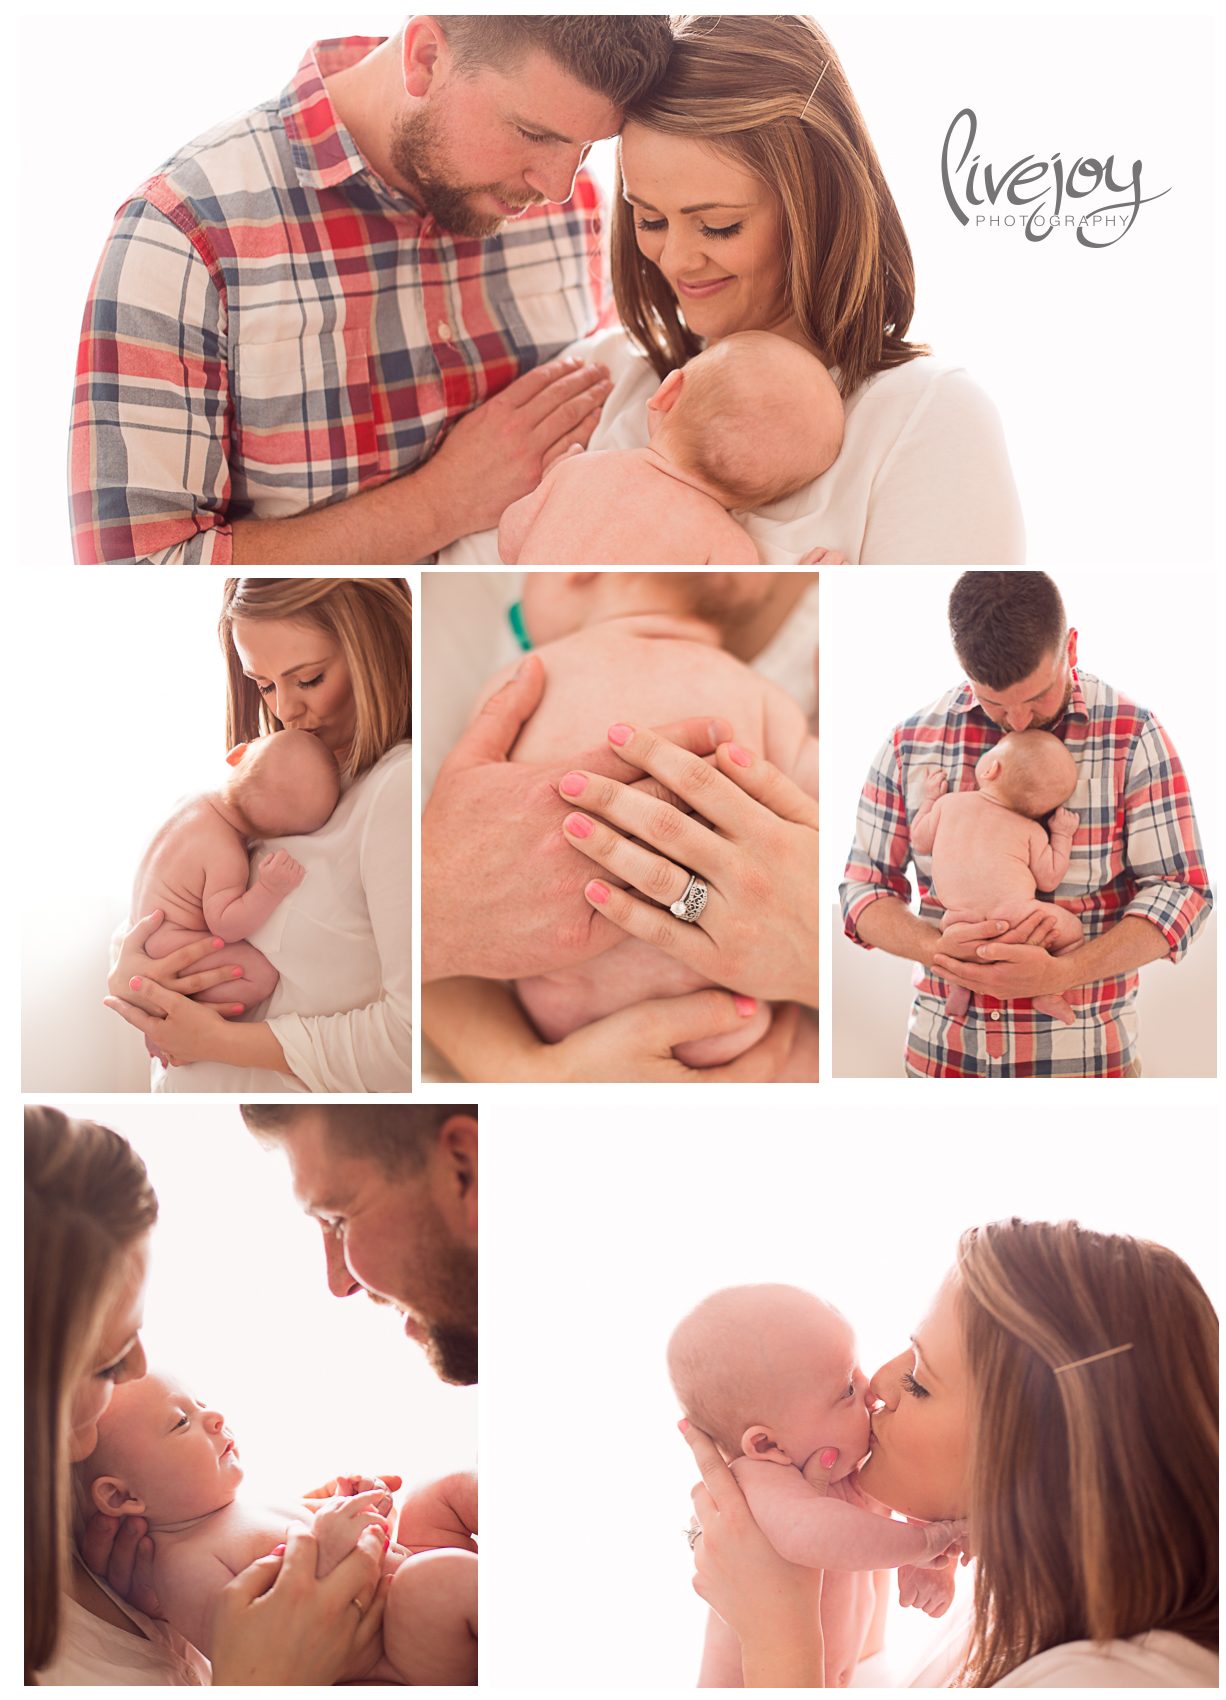 Baby Photos with Family | LiveJoy Photography